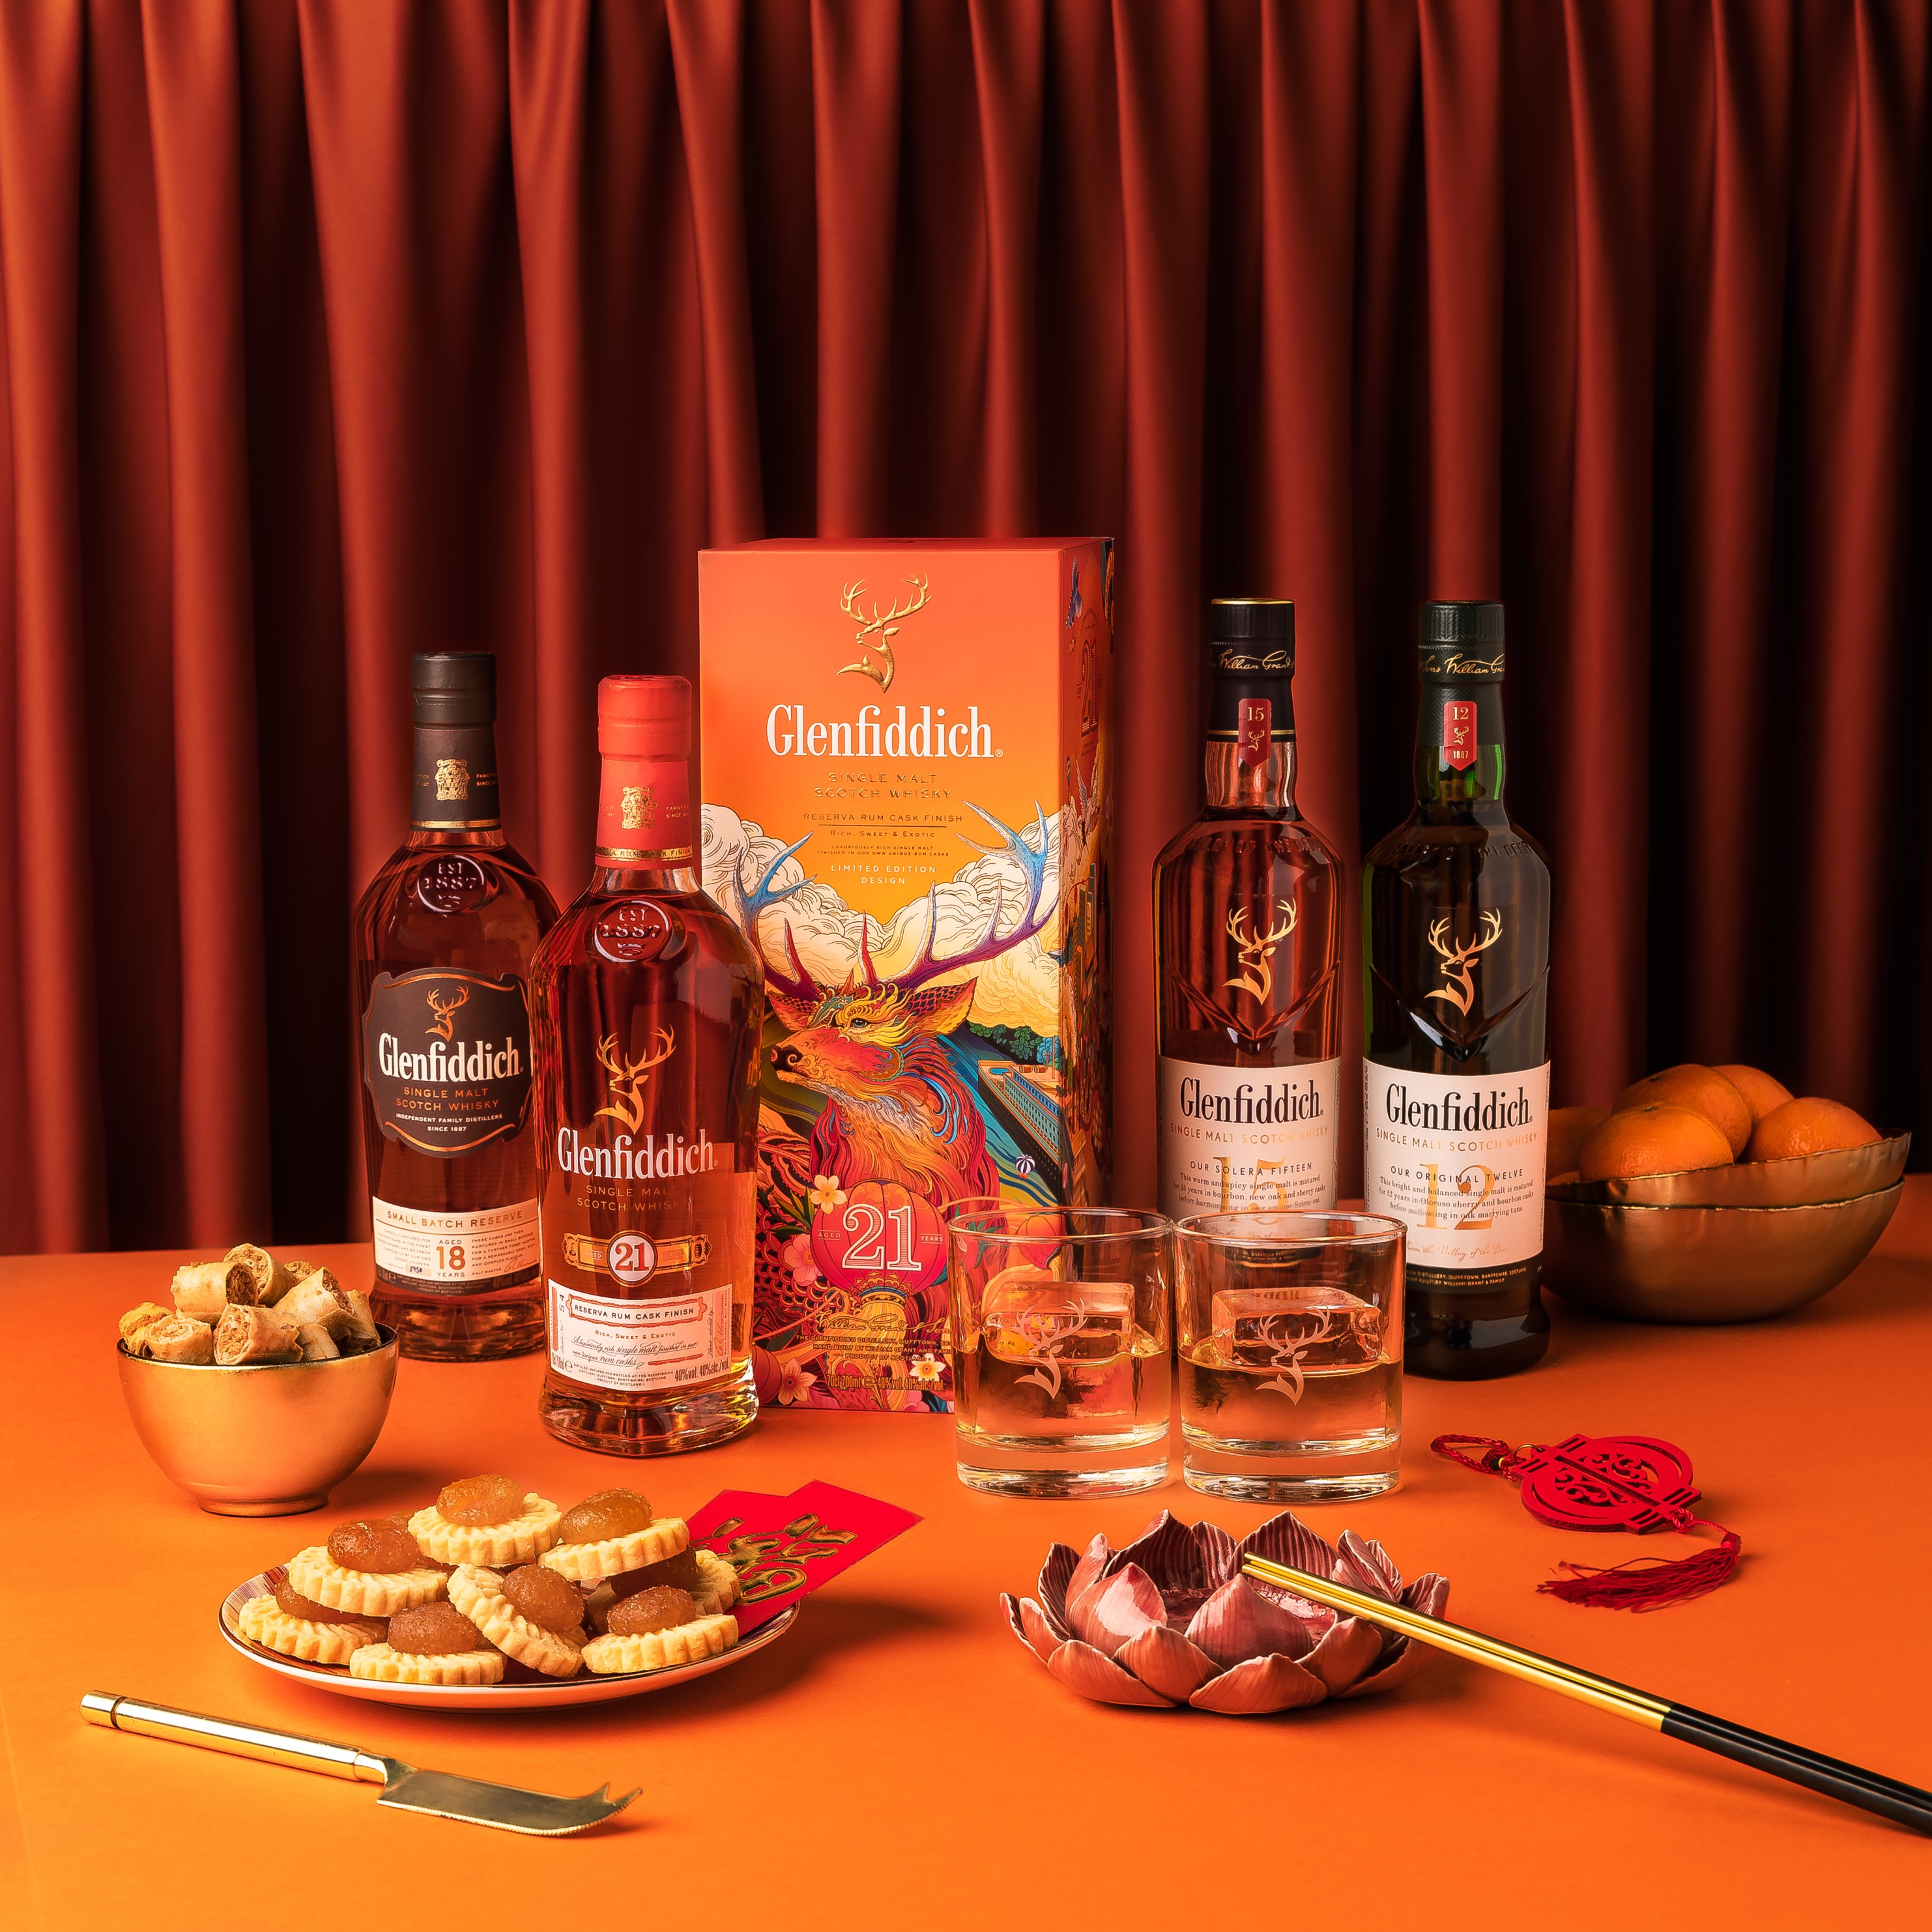 Glenfiddich Celebrates Chinese New Year with Spectacular Limited Edition Design